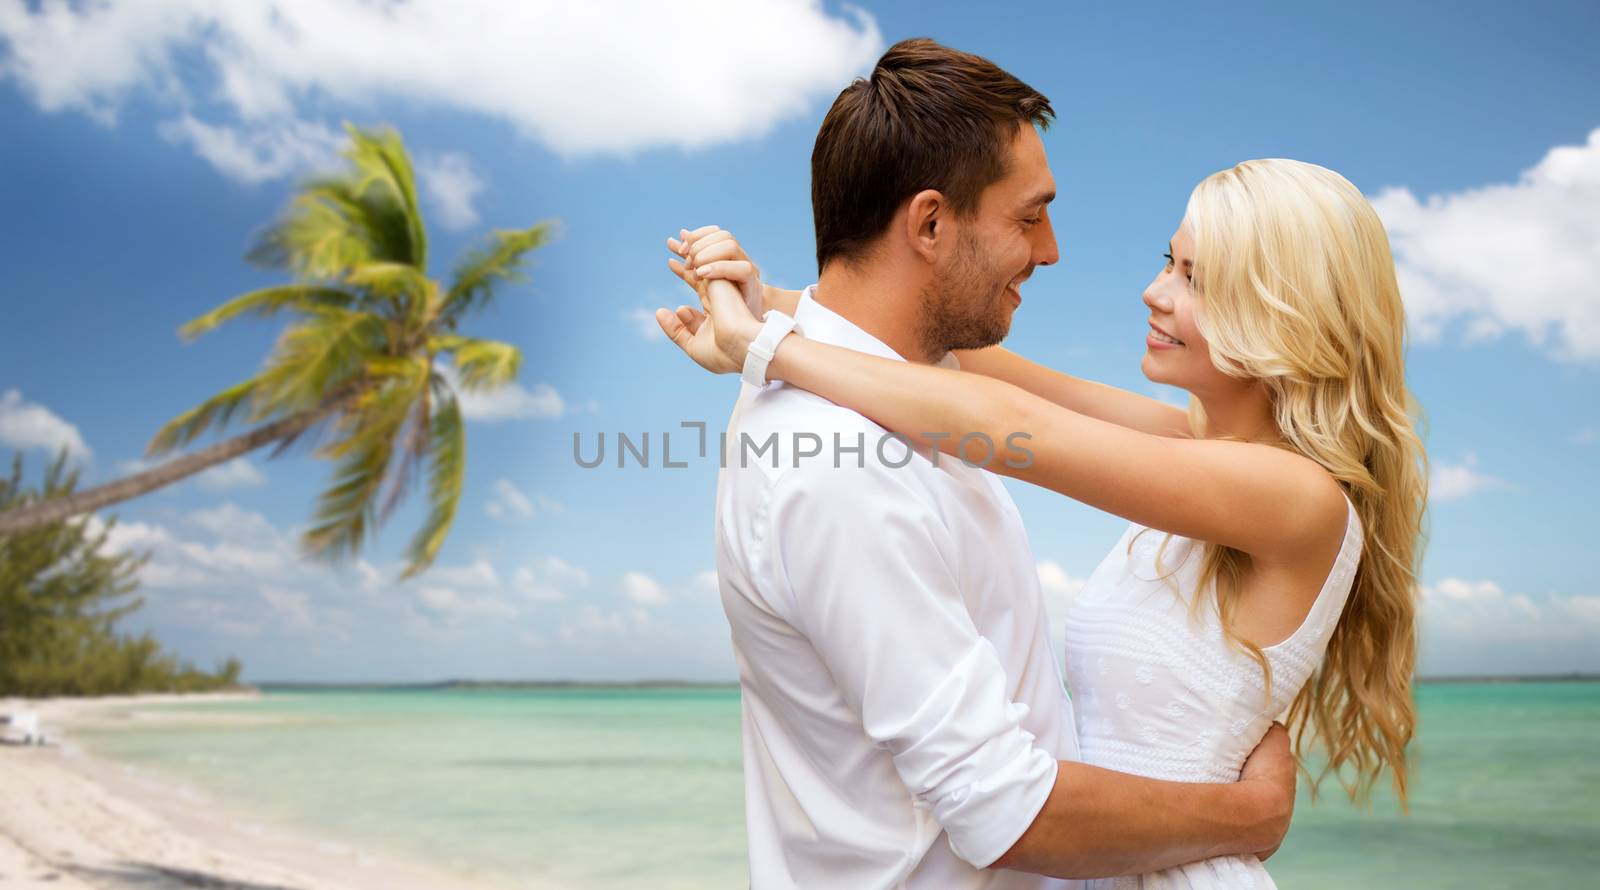 summer holidays, people, love, travel and dating concept - happy couple hugging over tropical beach background